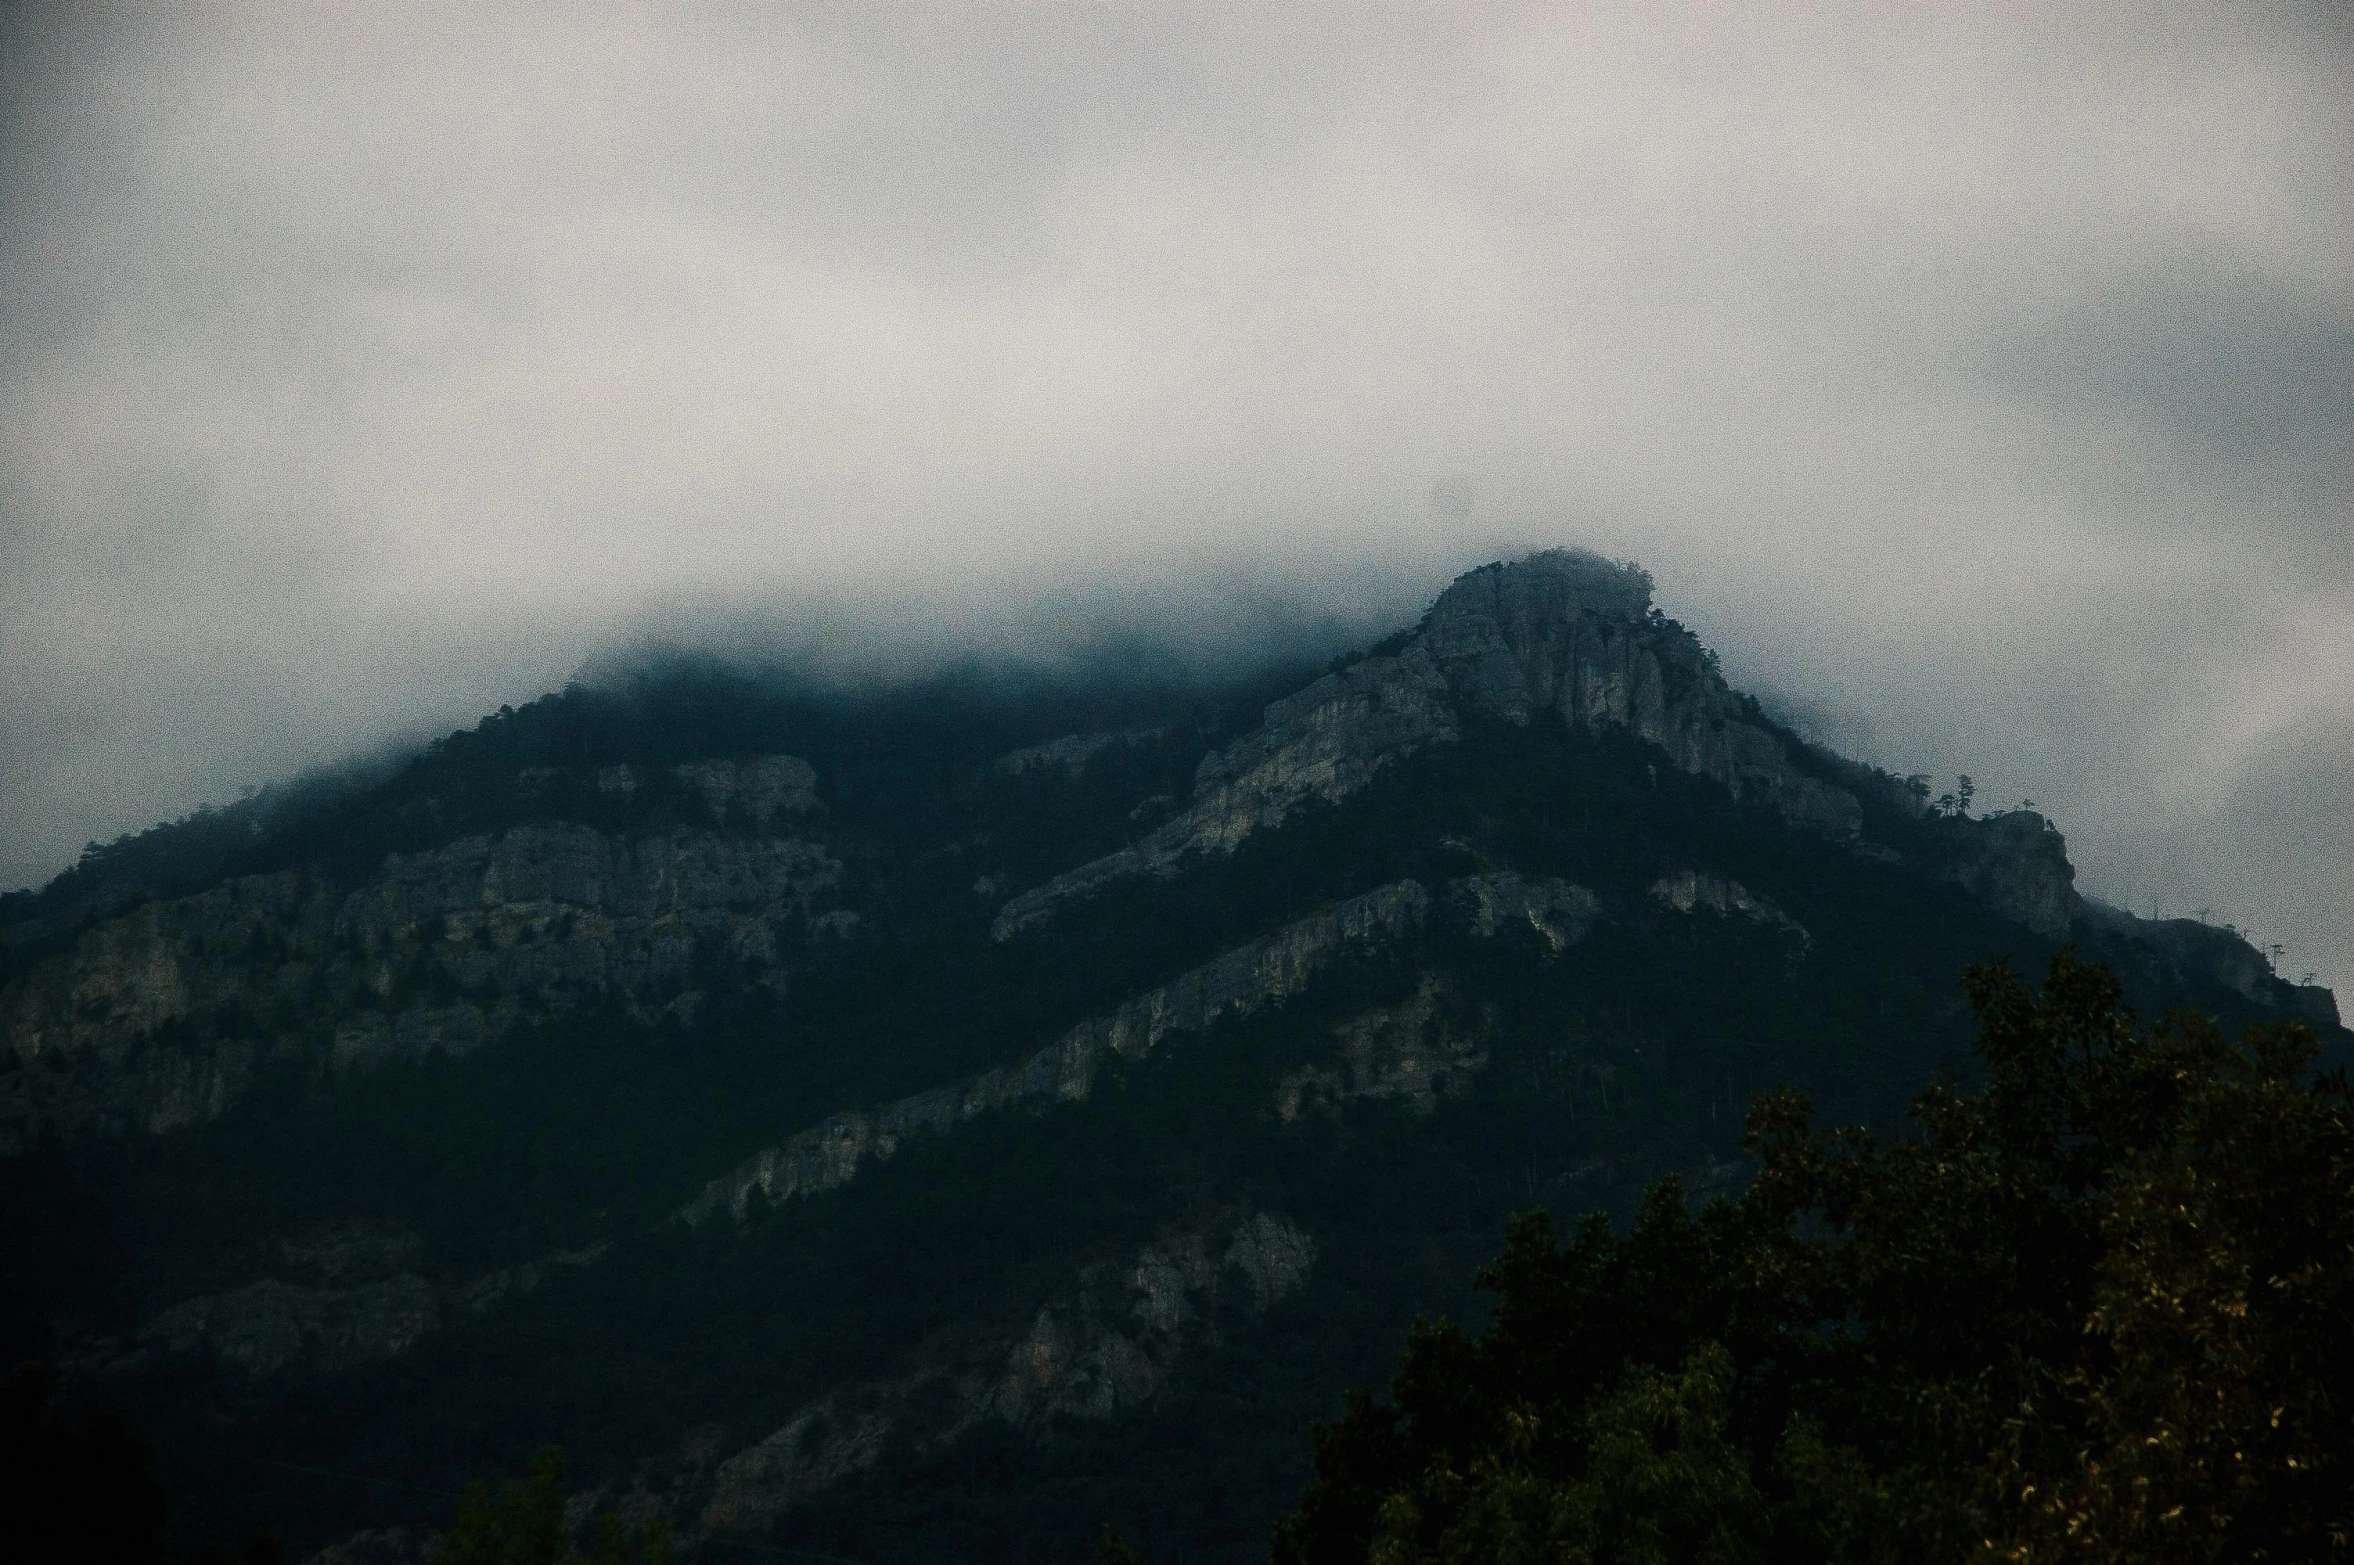 a large mountain is shown covered by clouds